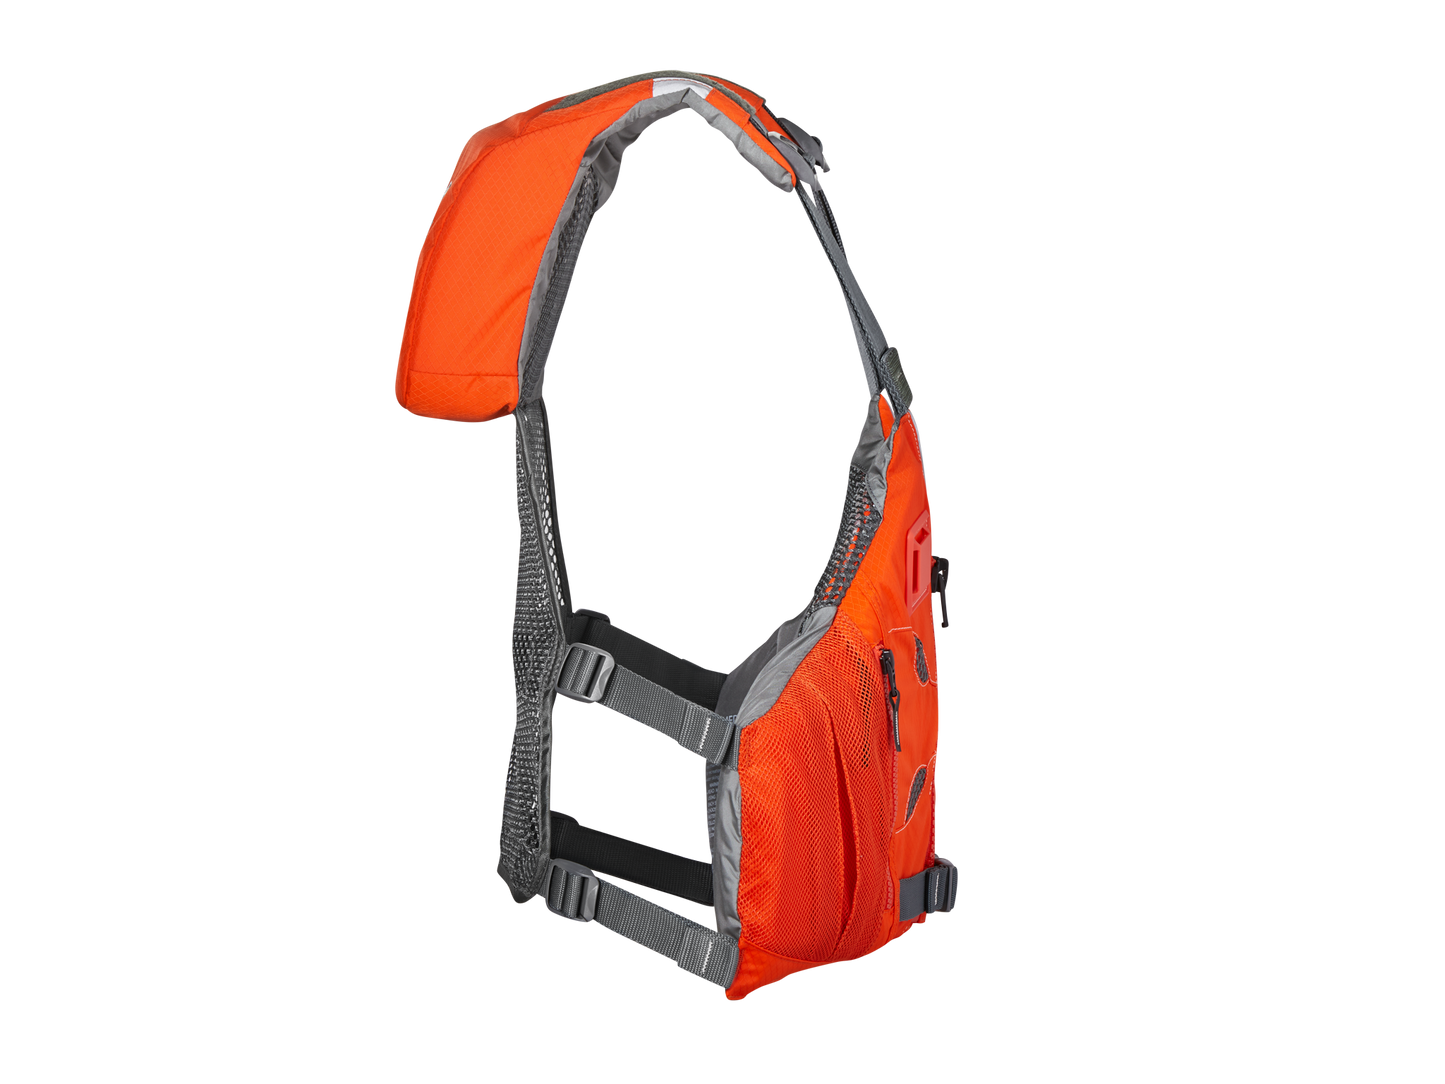 Astral, V-Eight Fisher Life Jacket PFD for Kayak India